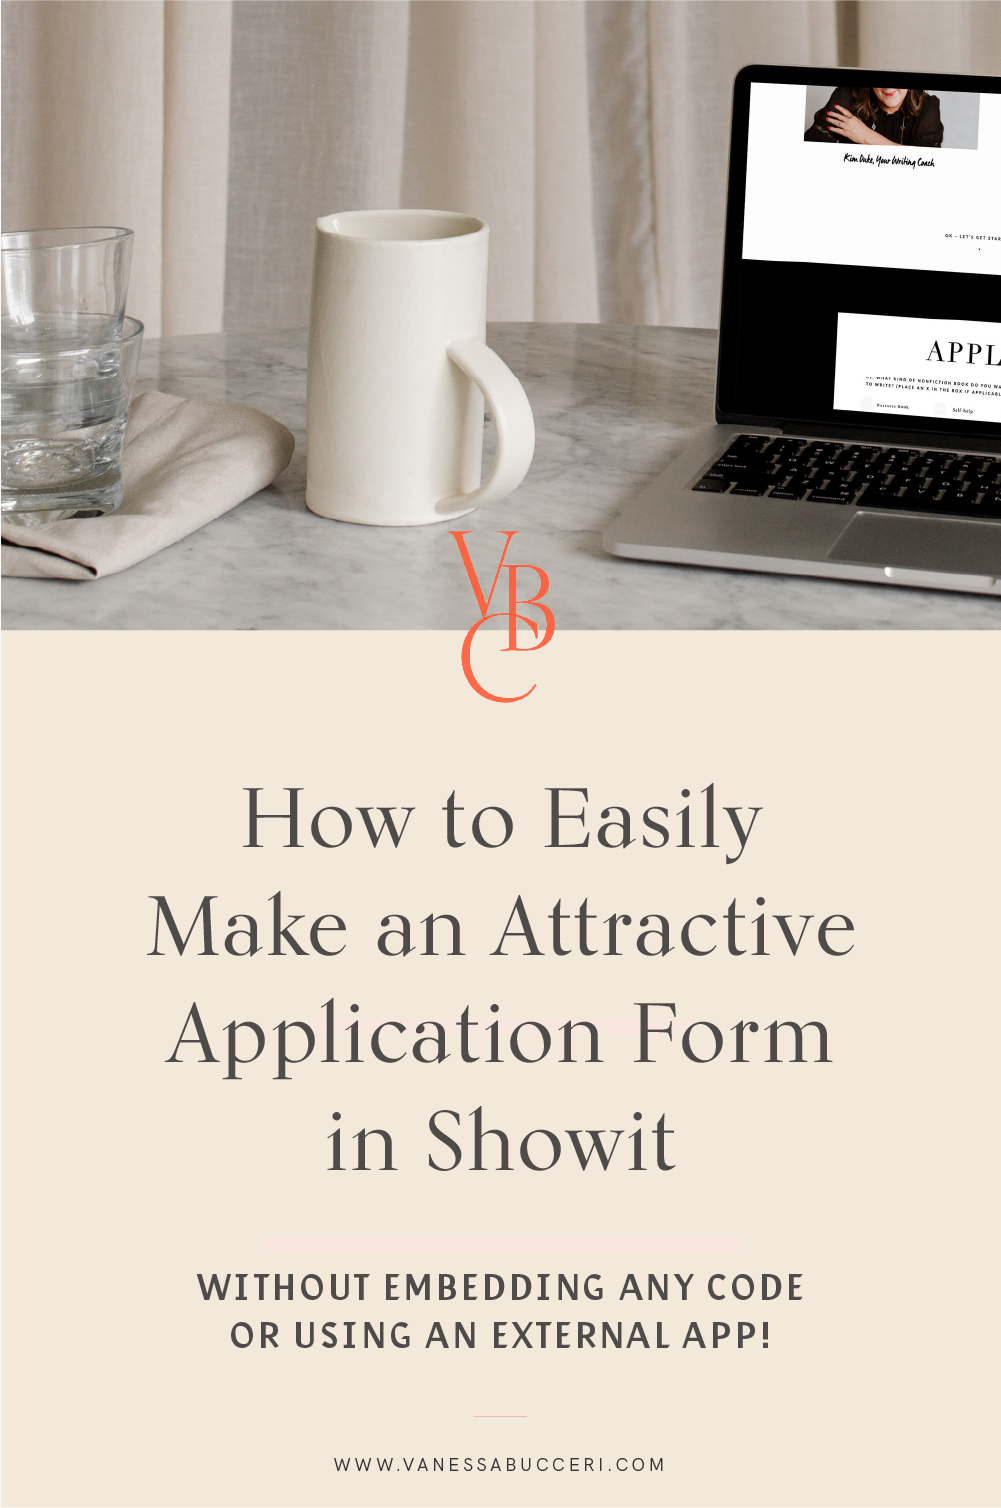 How to easily make an application form on your Showit website